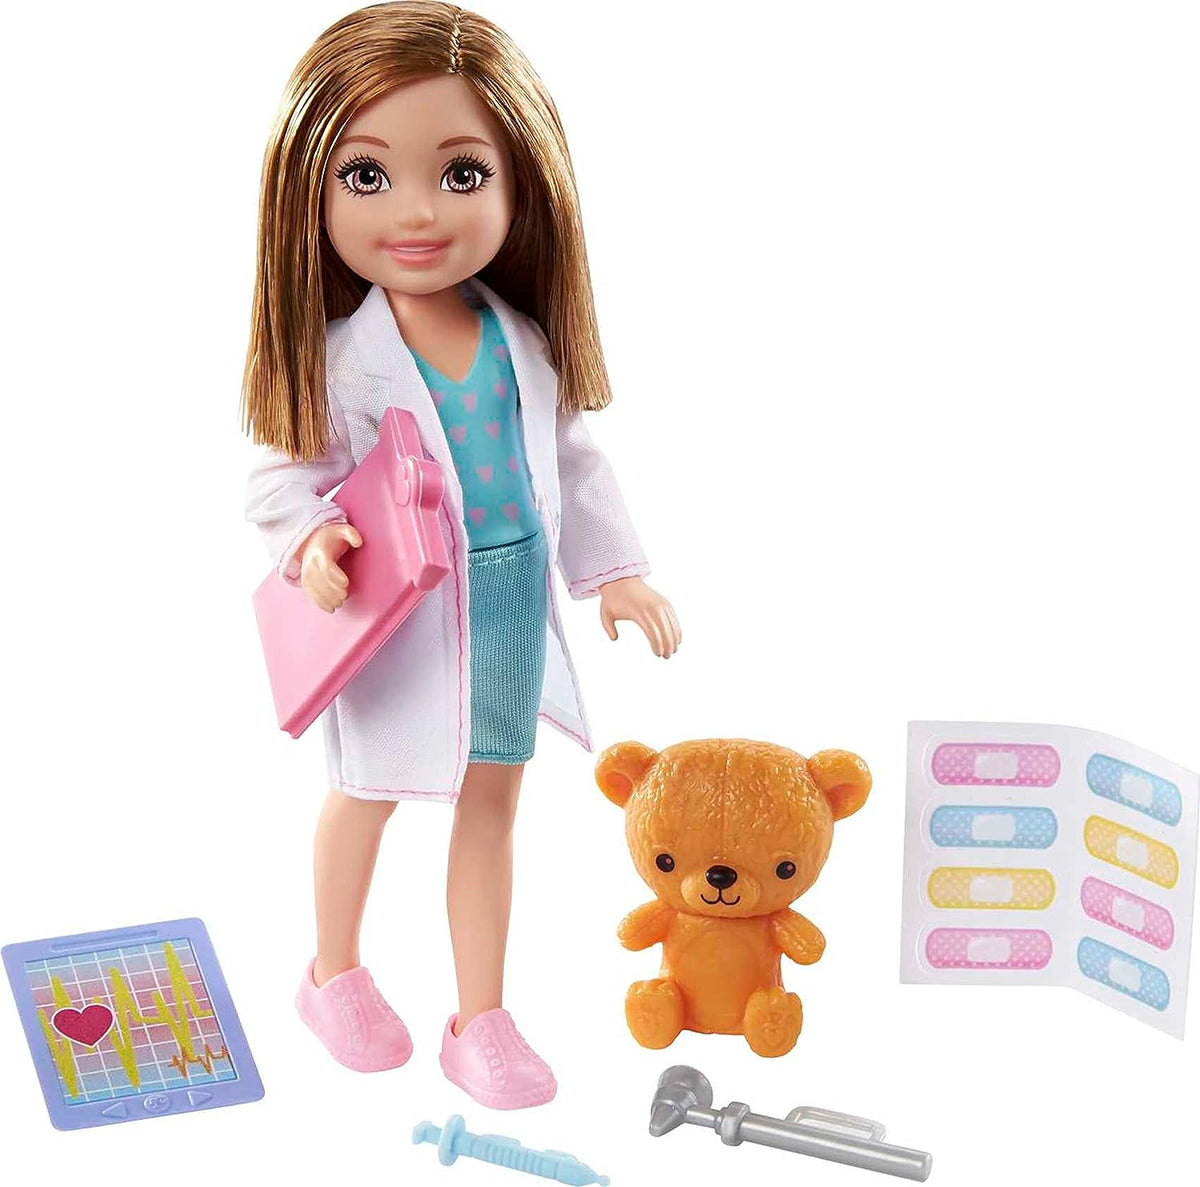 Barbie Chelsea Can Be 6 Inch Brunette Chelsea Doctor Doll Playset for Ages 3 Years Old & Up